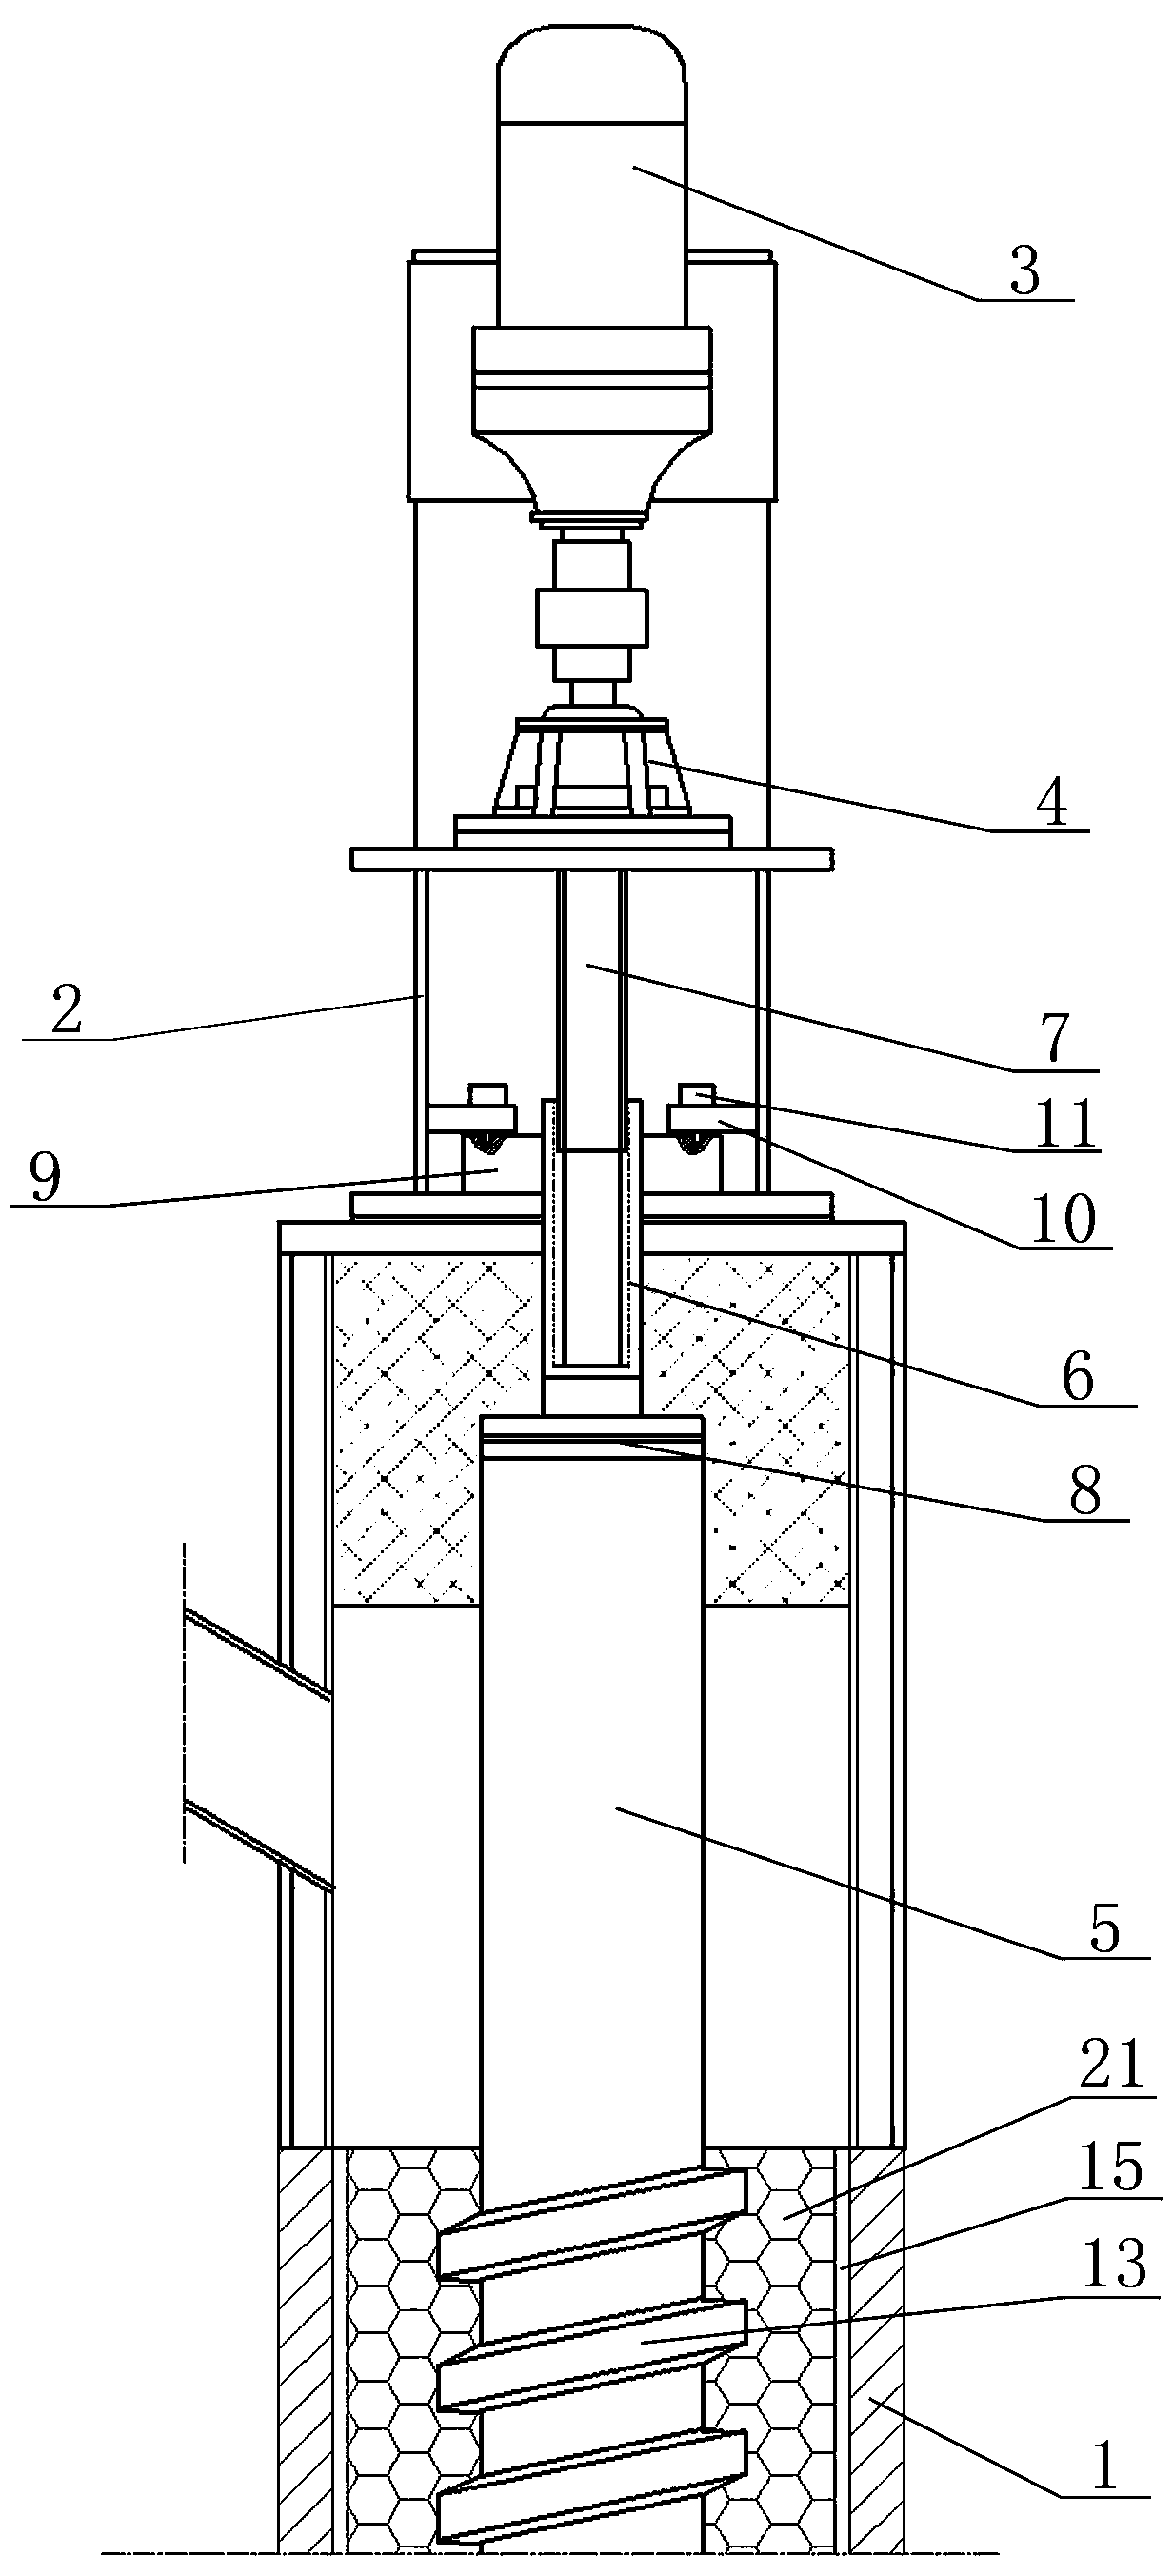 Reduction tank assembly with rotary stirring inner core structure for vertical reduction furnace